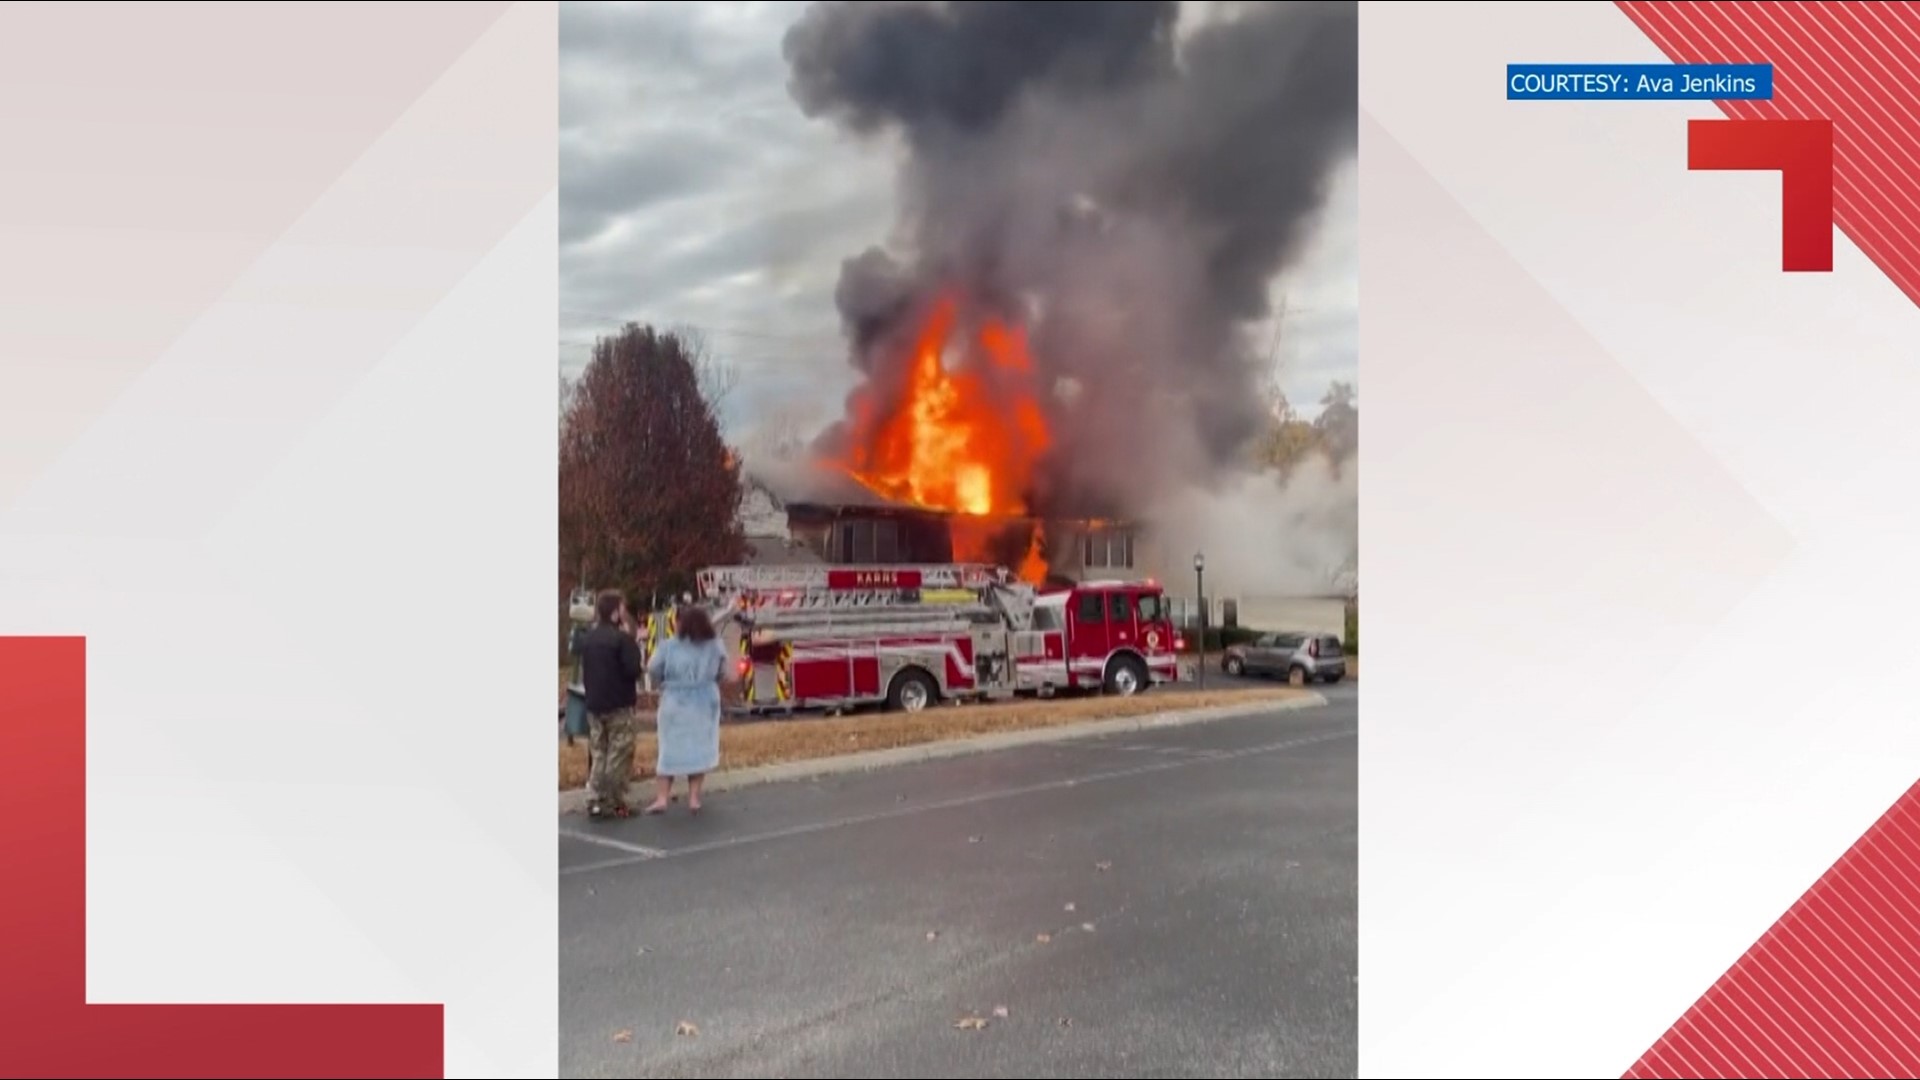 The Knox County Sheriff's Office said one person died after a fire at Forest Ridge Apartments near Karns and Hardin Valley.